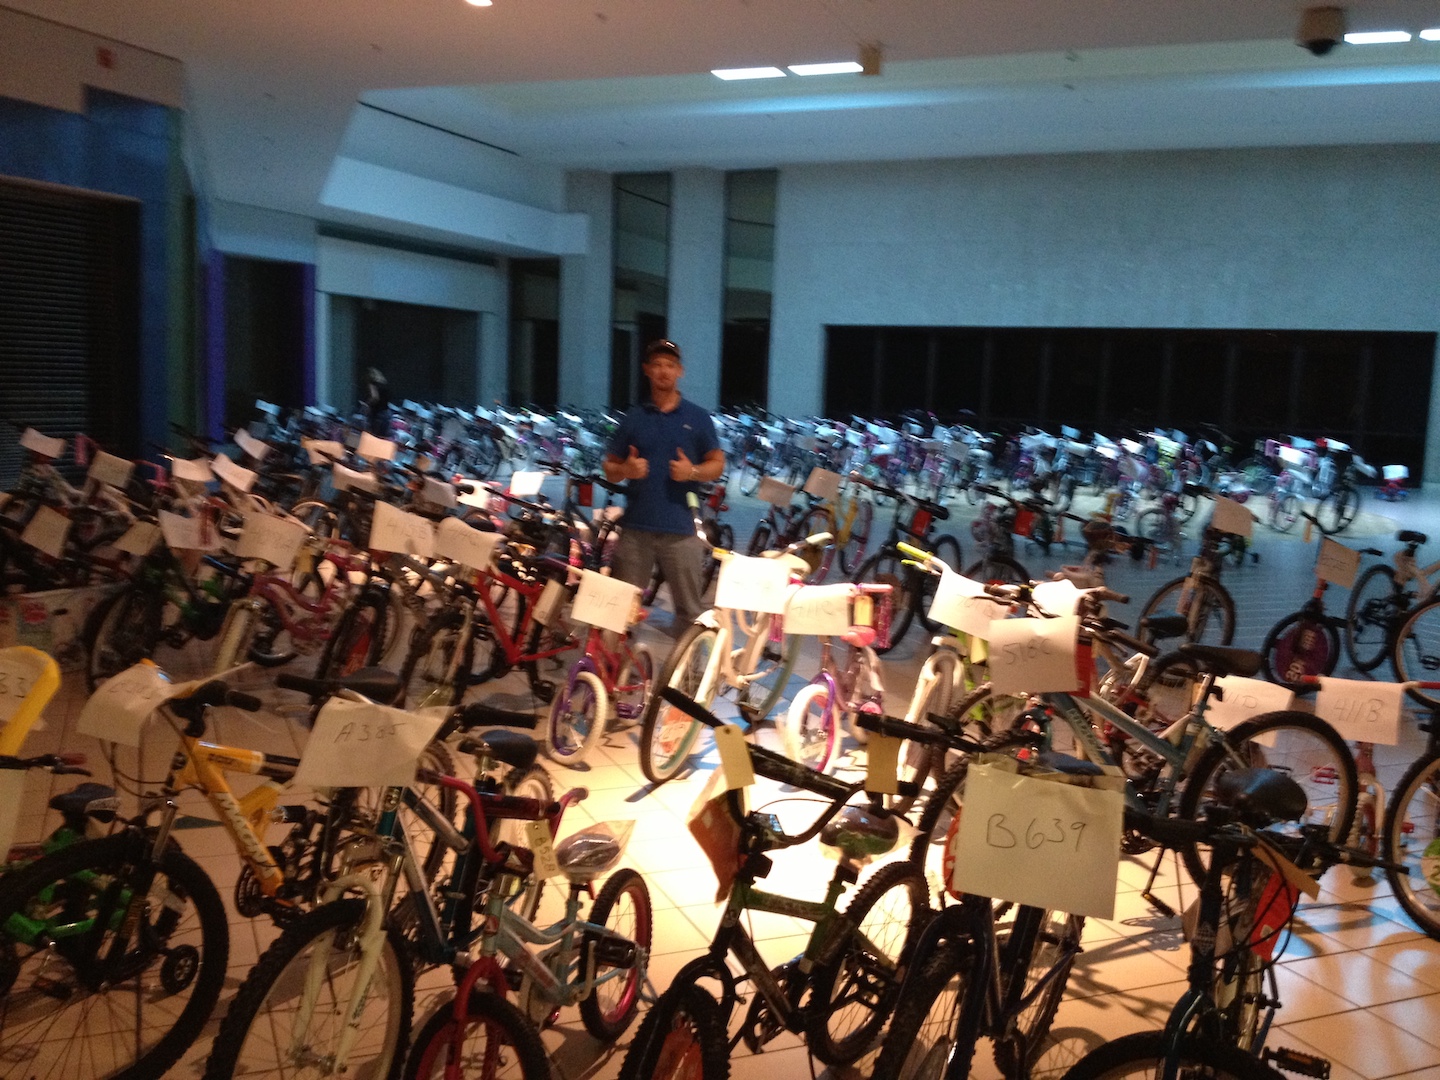 VIBE team member in the middle of a large group of bicycles Tampa Bay Salvation Army's Angel Tree Program